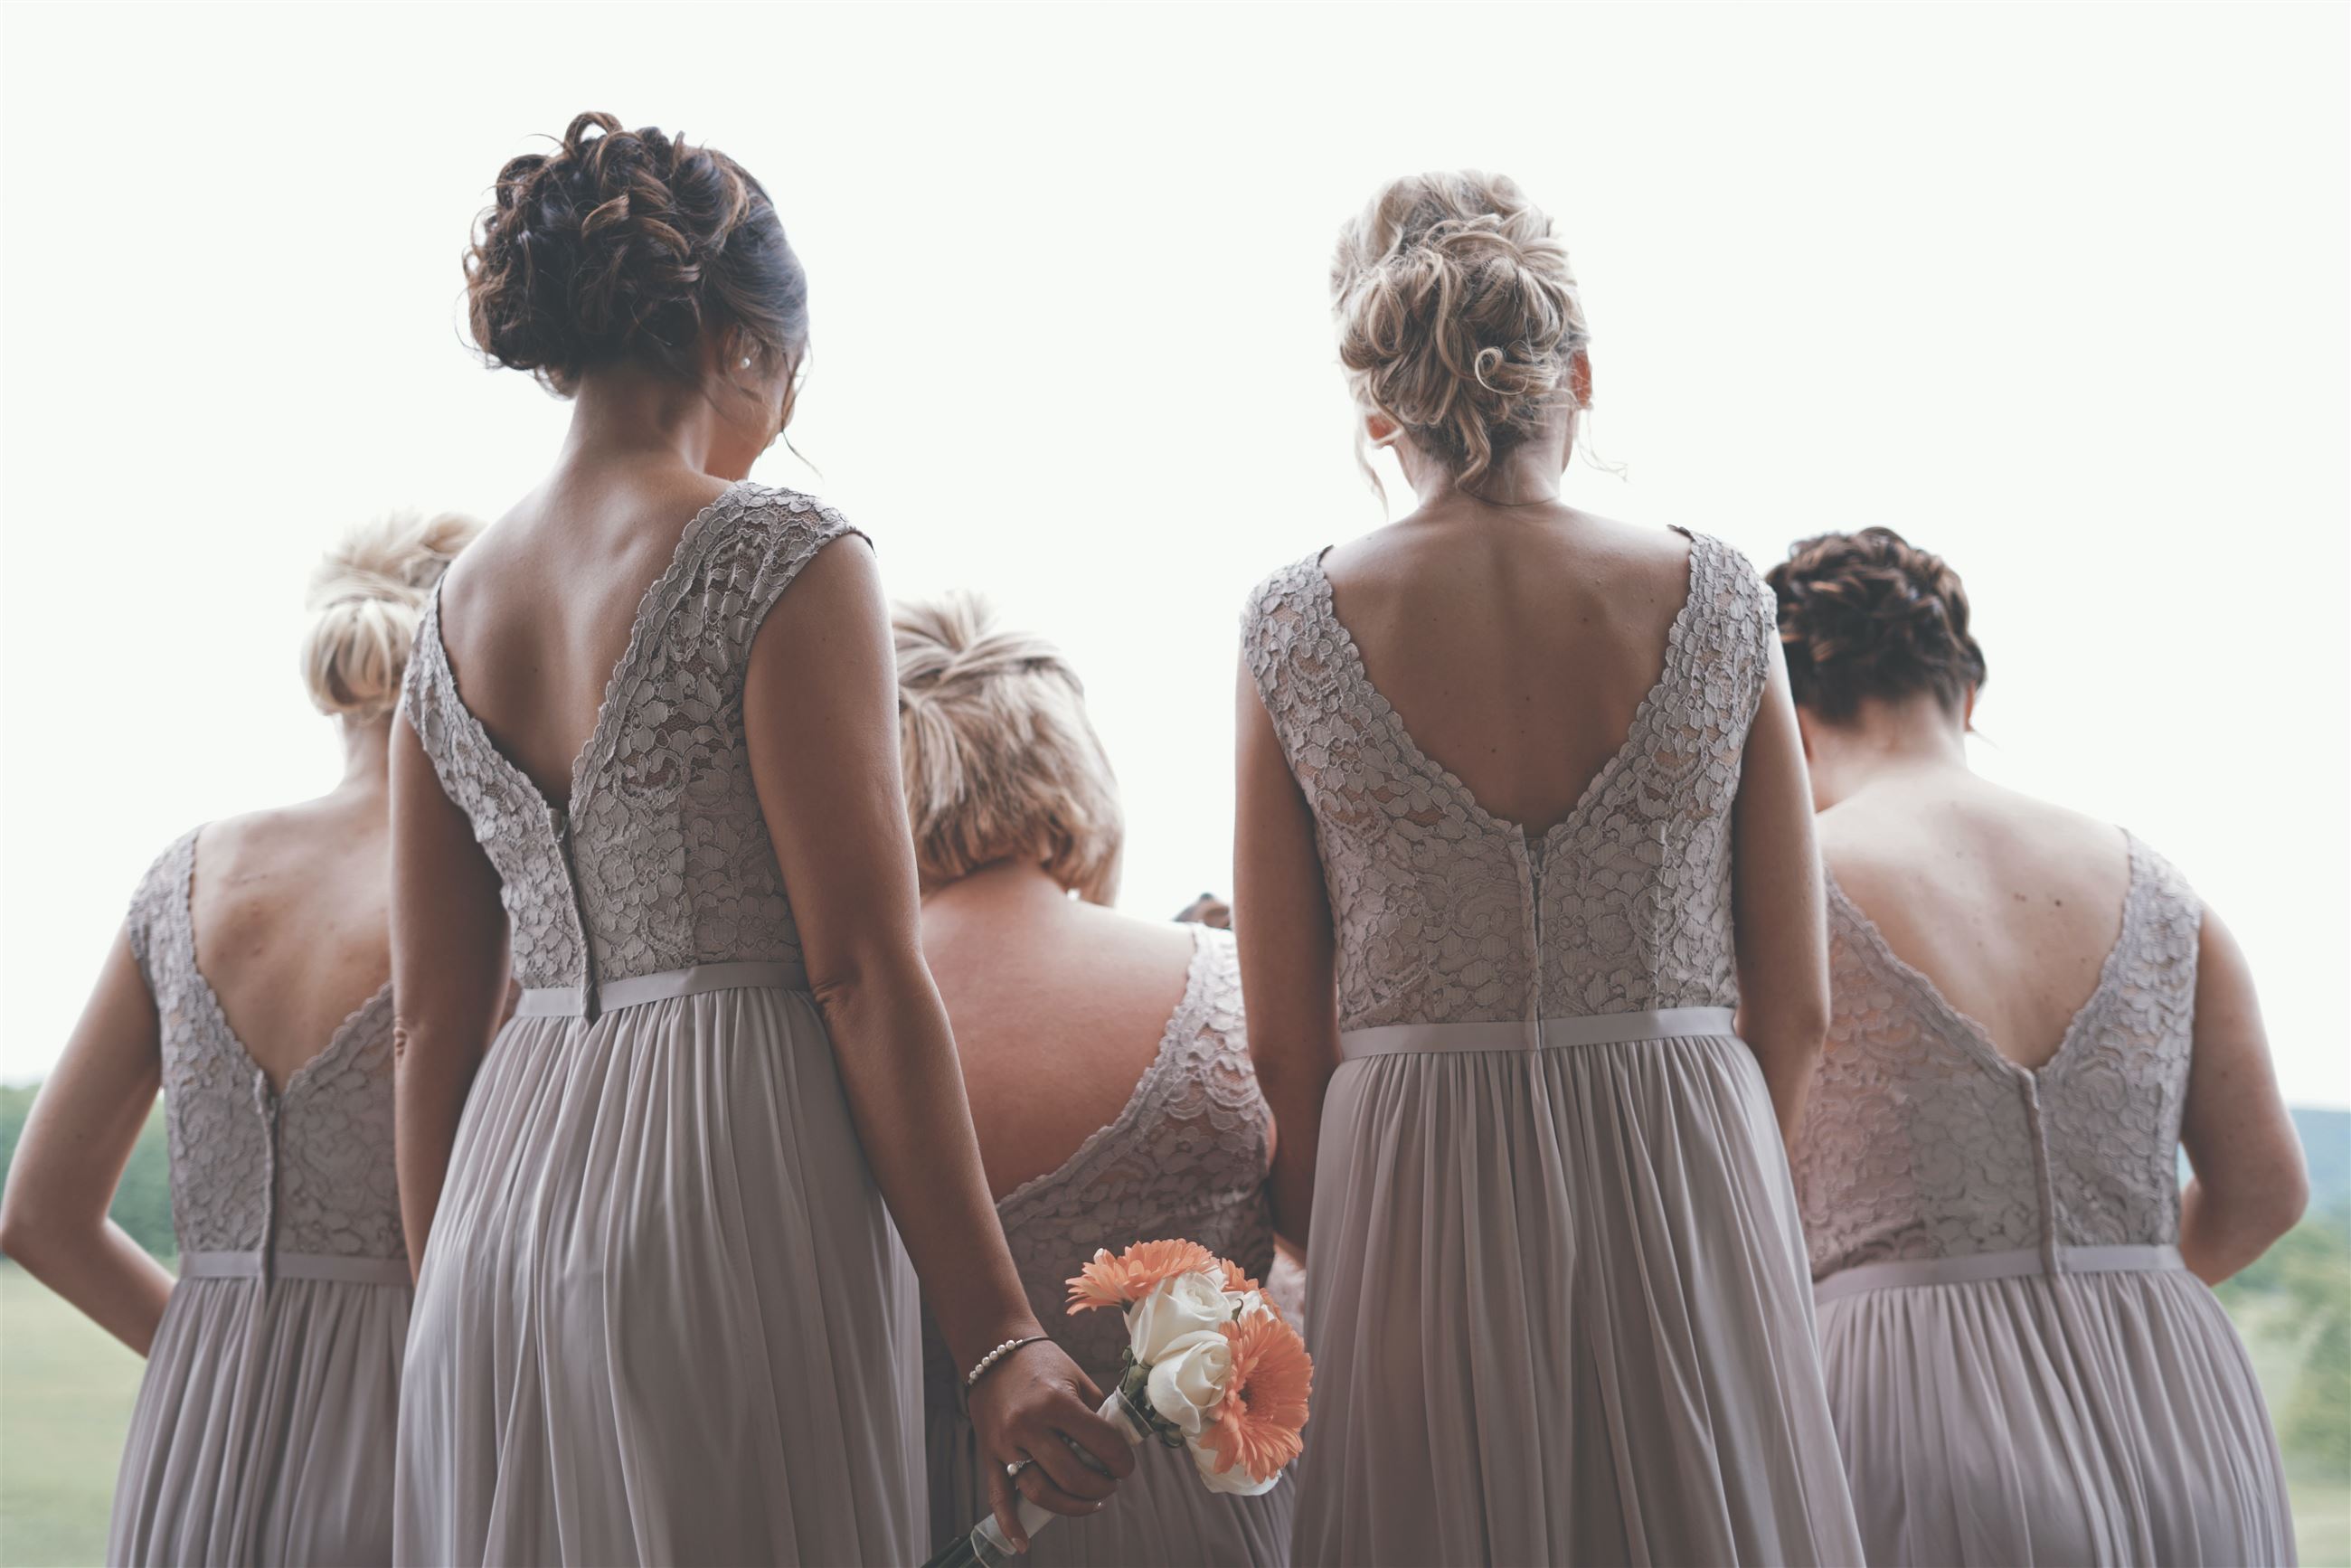 How to: Maid of Honor Duties Image